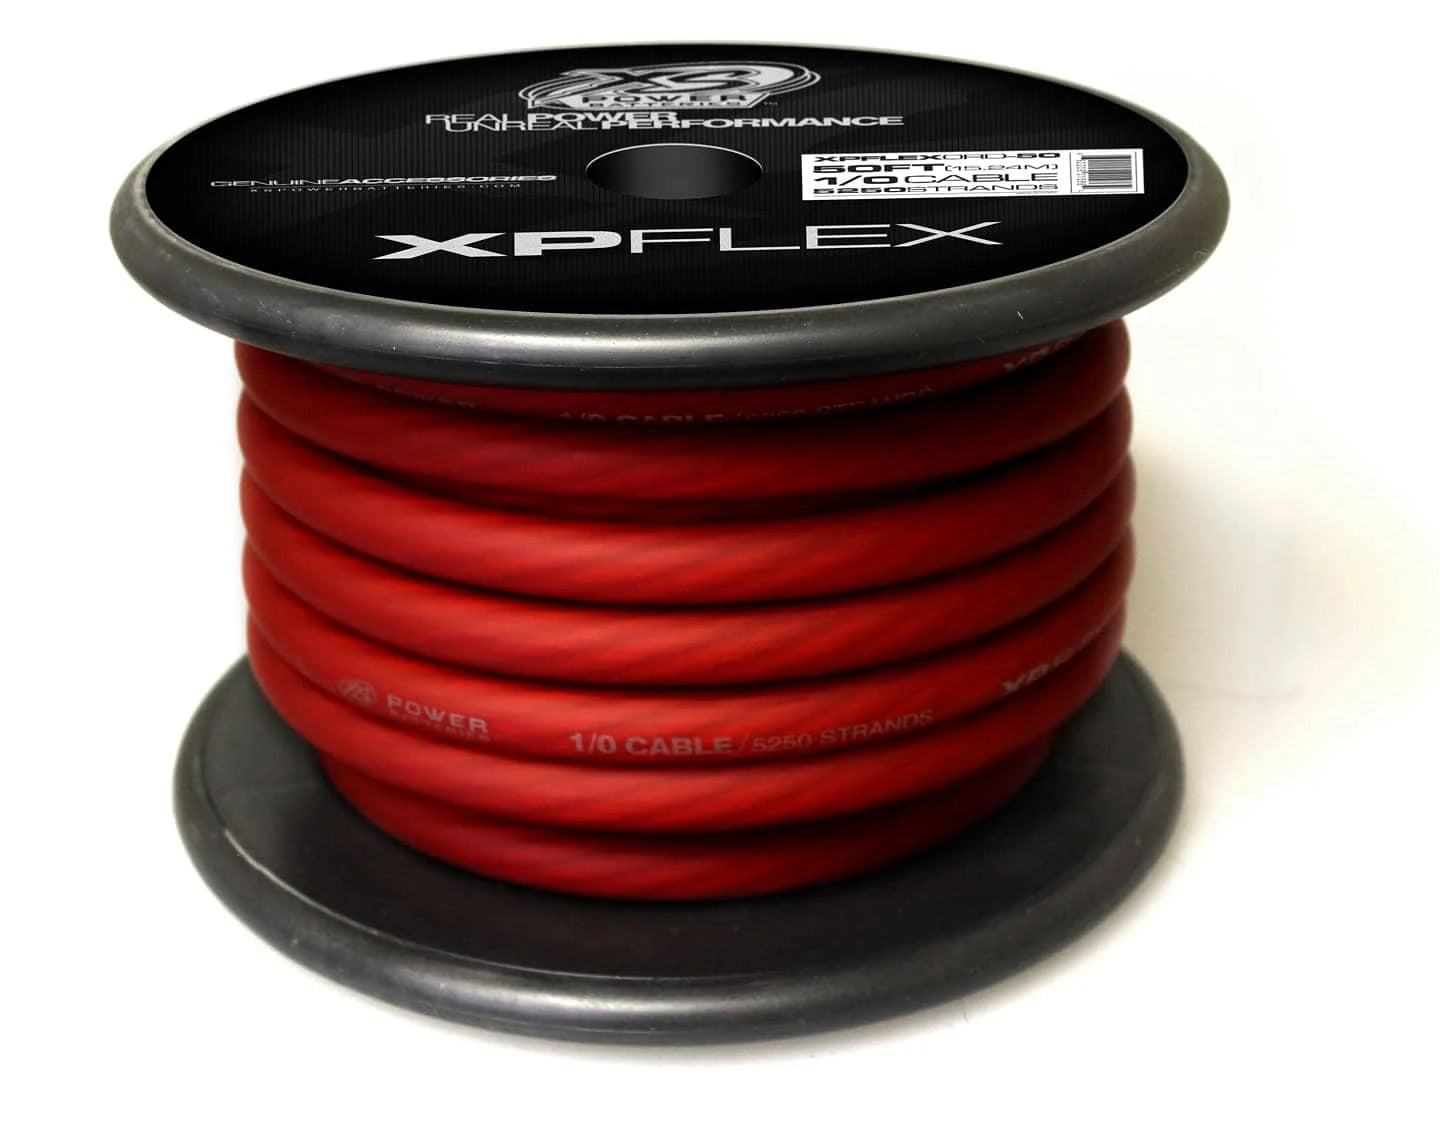 XS Power 1/0 AWG Gauge XP Flex Car Audio Power and Ground Cable 50ft Spool Electrical Wire